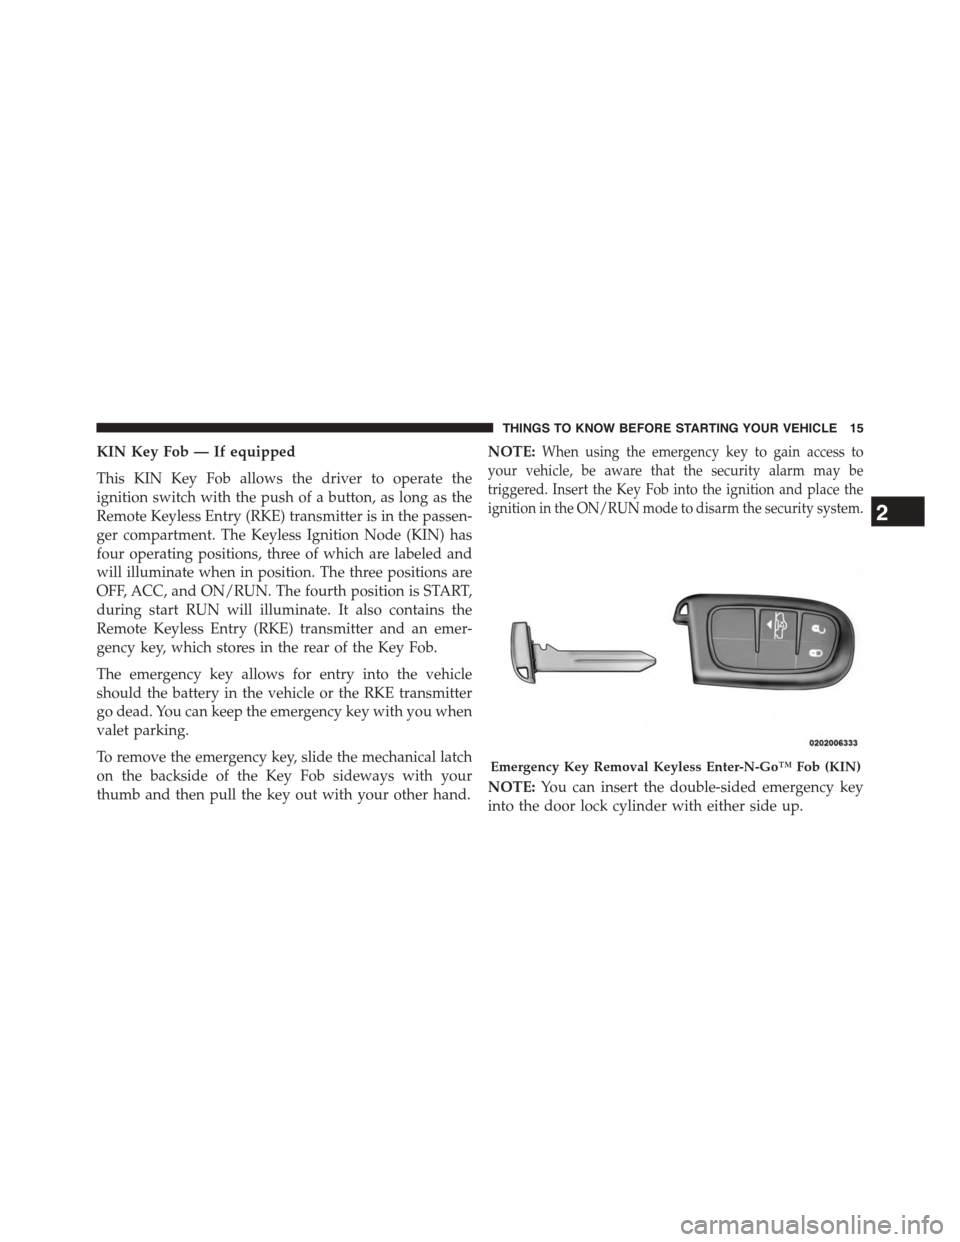 Ram 1500 2015 User Guide KIN Key Fob — If equipped
This KIN Key Fob allows the driver to operate the
ignition switch with the push of a button, as long as the
Remote Keyless Entry (RKE) transmitter is in the passen-
ger com